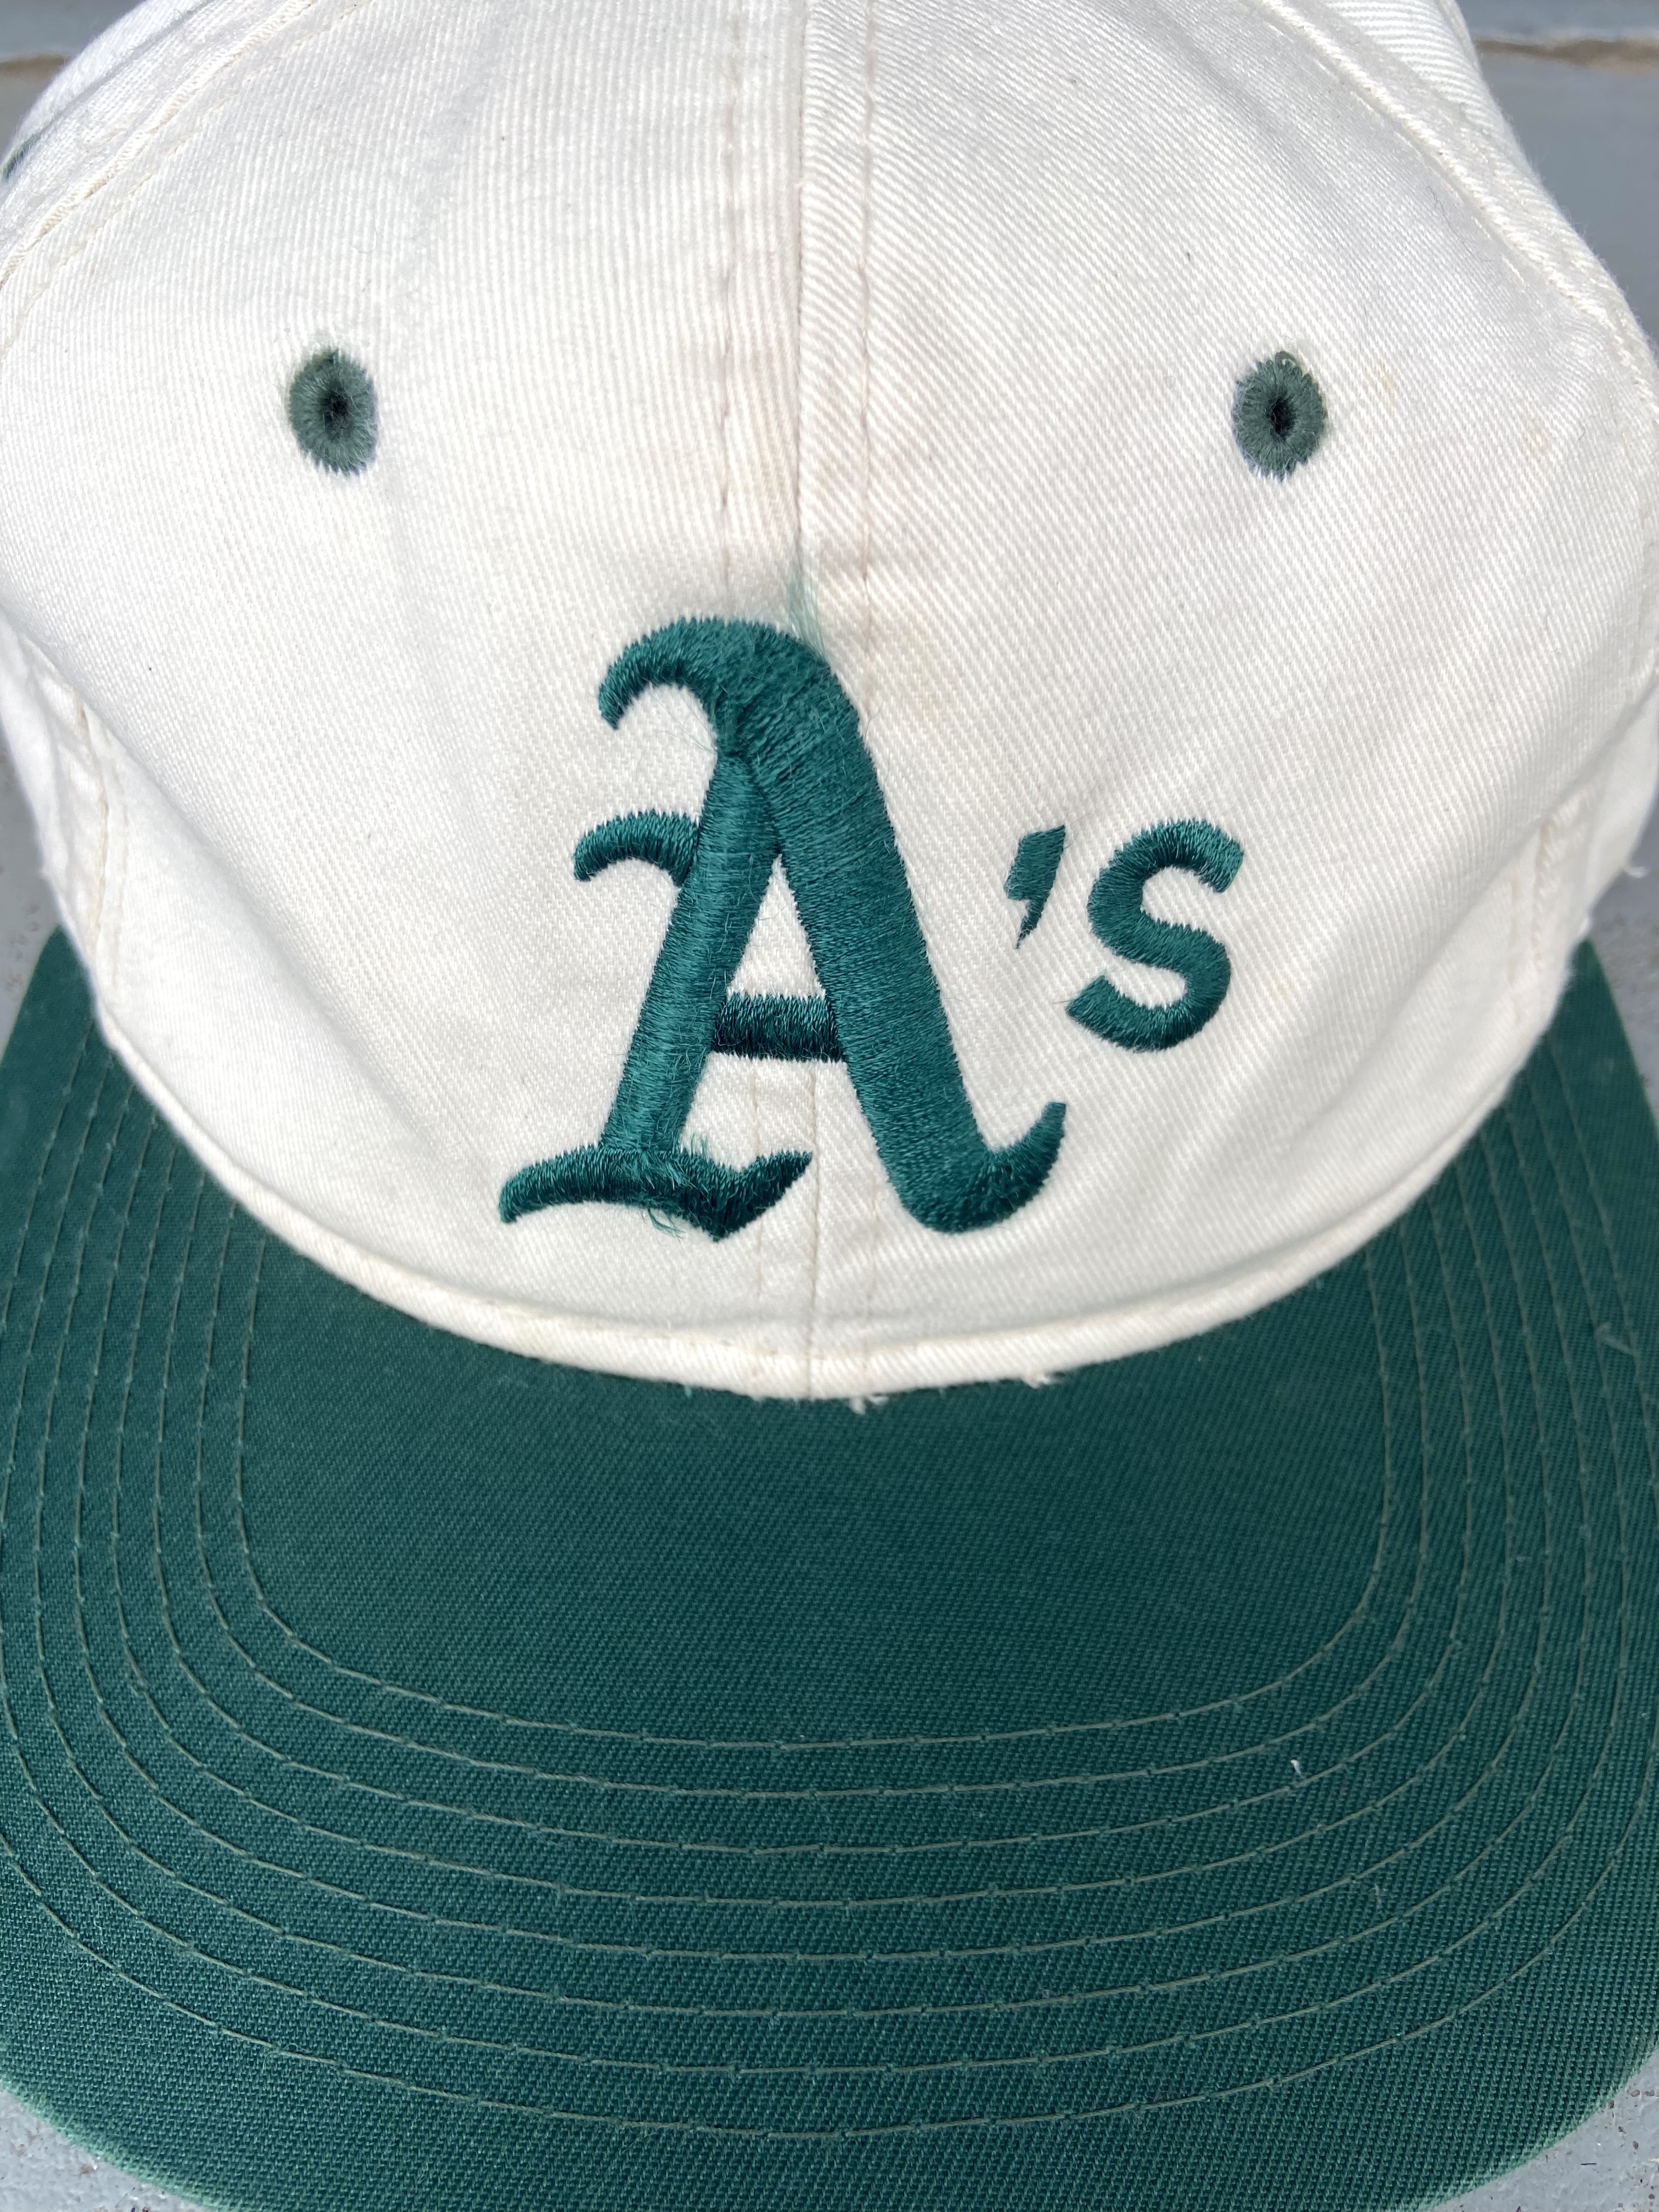 Oakland A's MLB Vintage Sports Specialties Fitted Hat